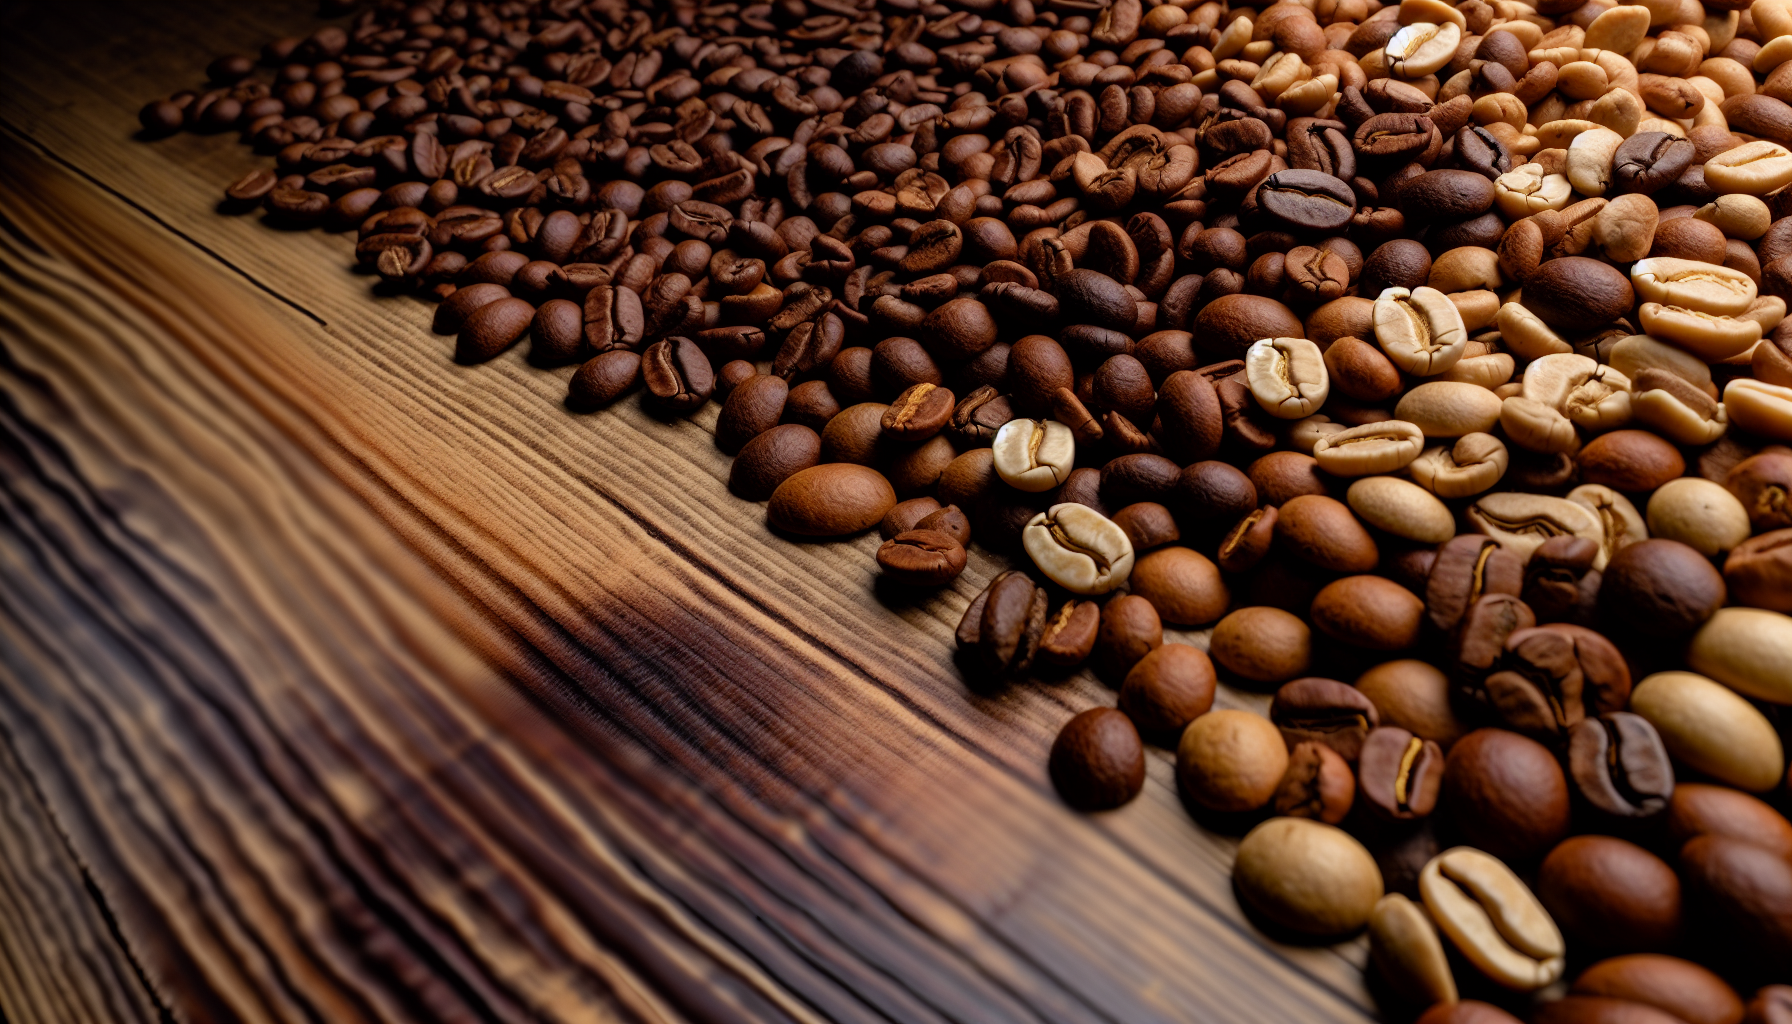 A variety of organic coffee beans